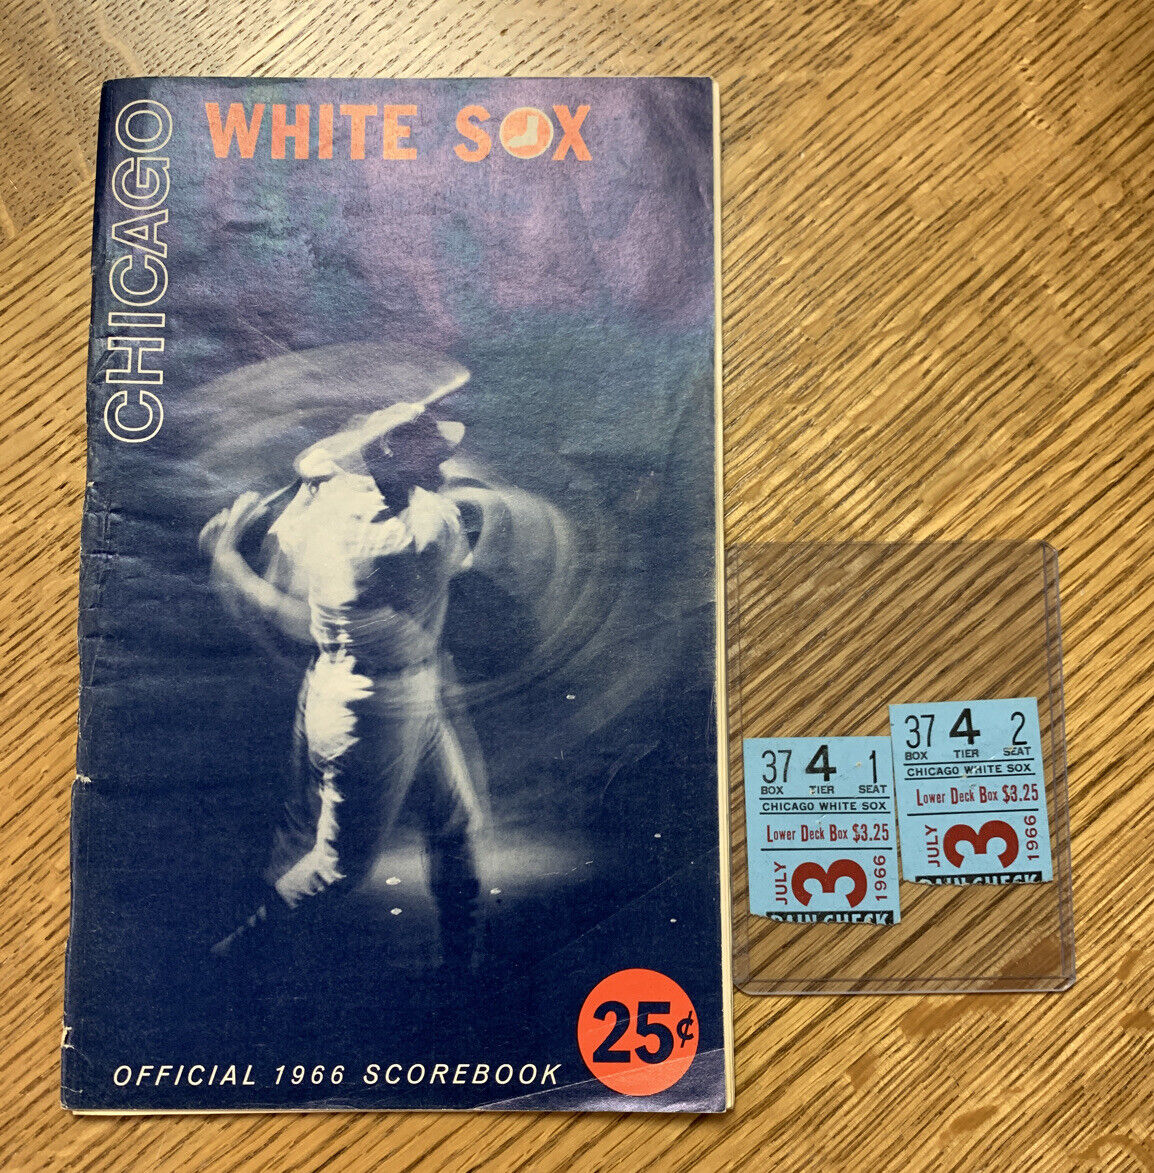 Chicago White Sox vs Red 1966 Comiskey Official Scorebook at Fees Dedication free